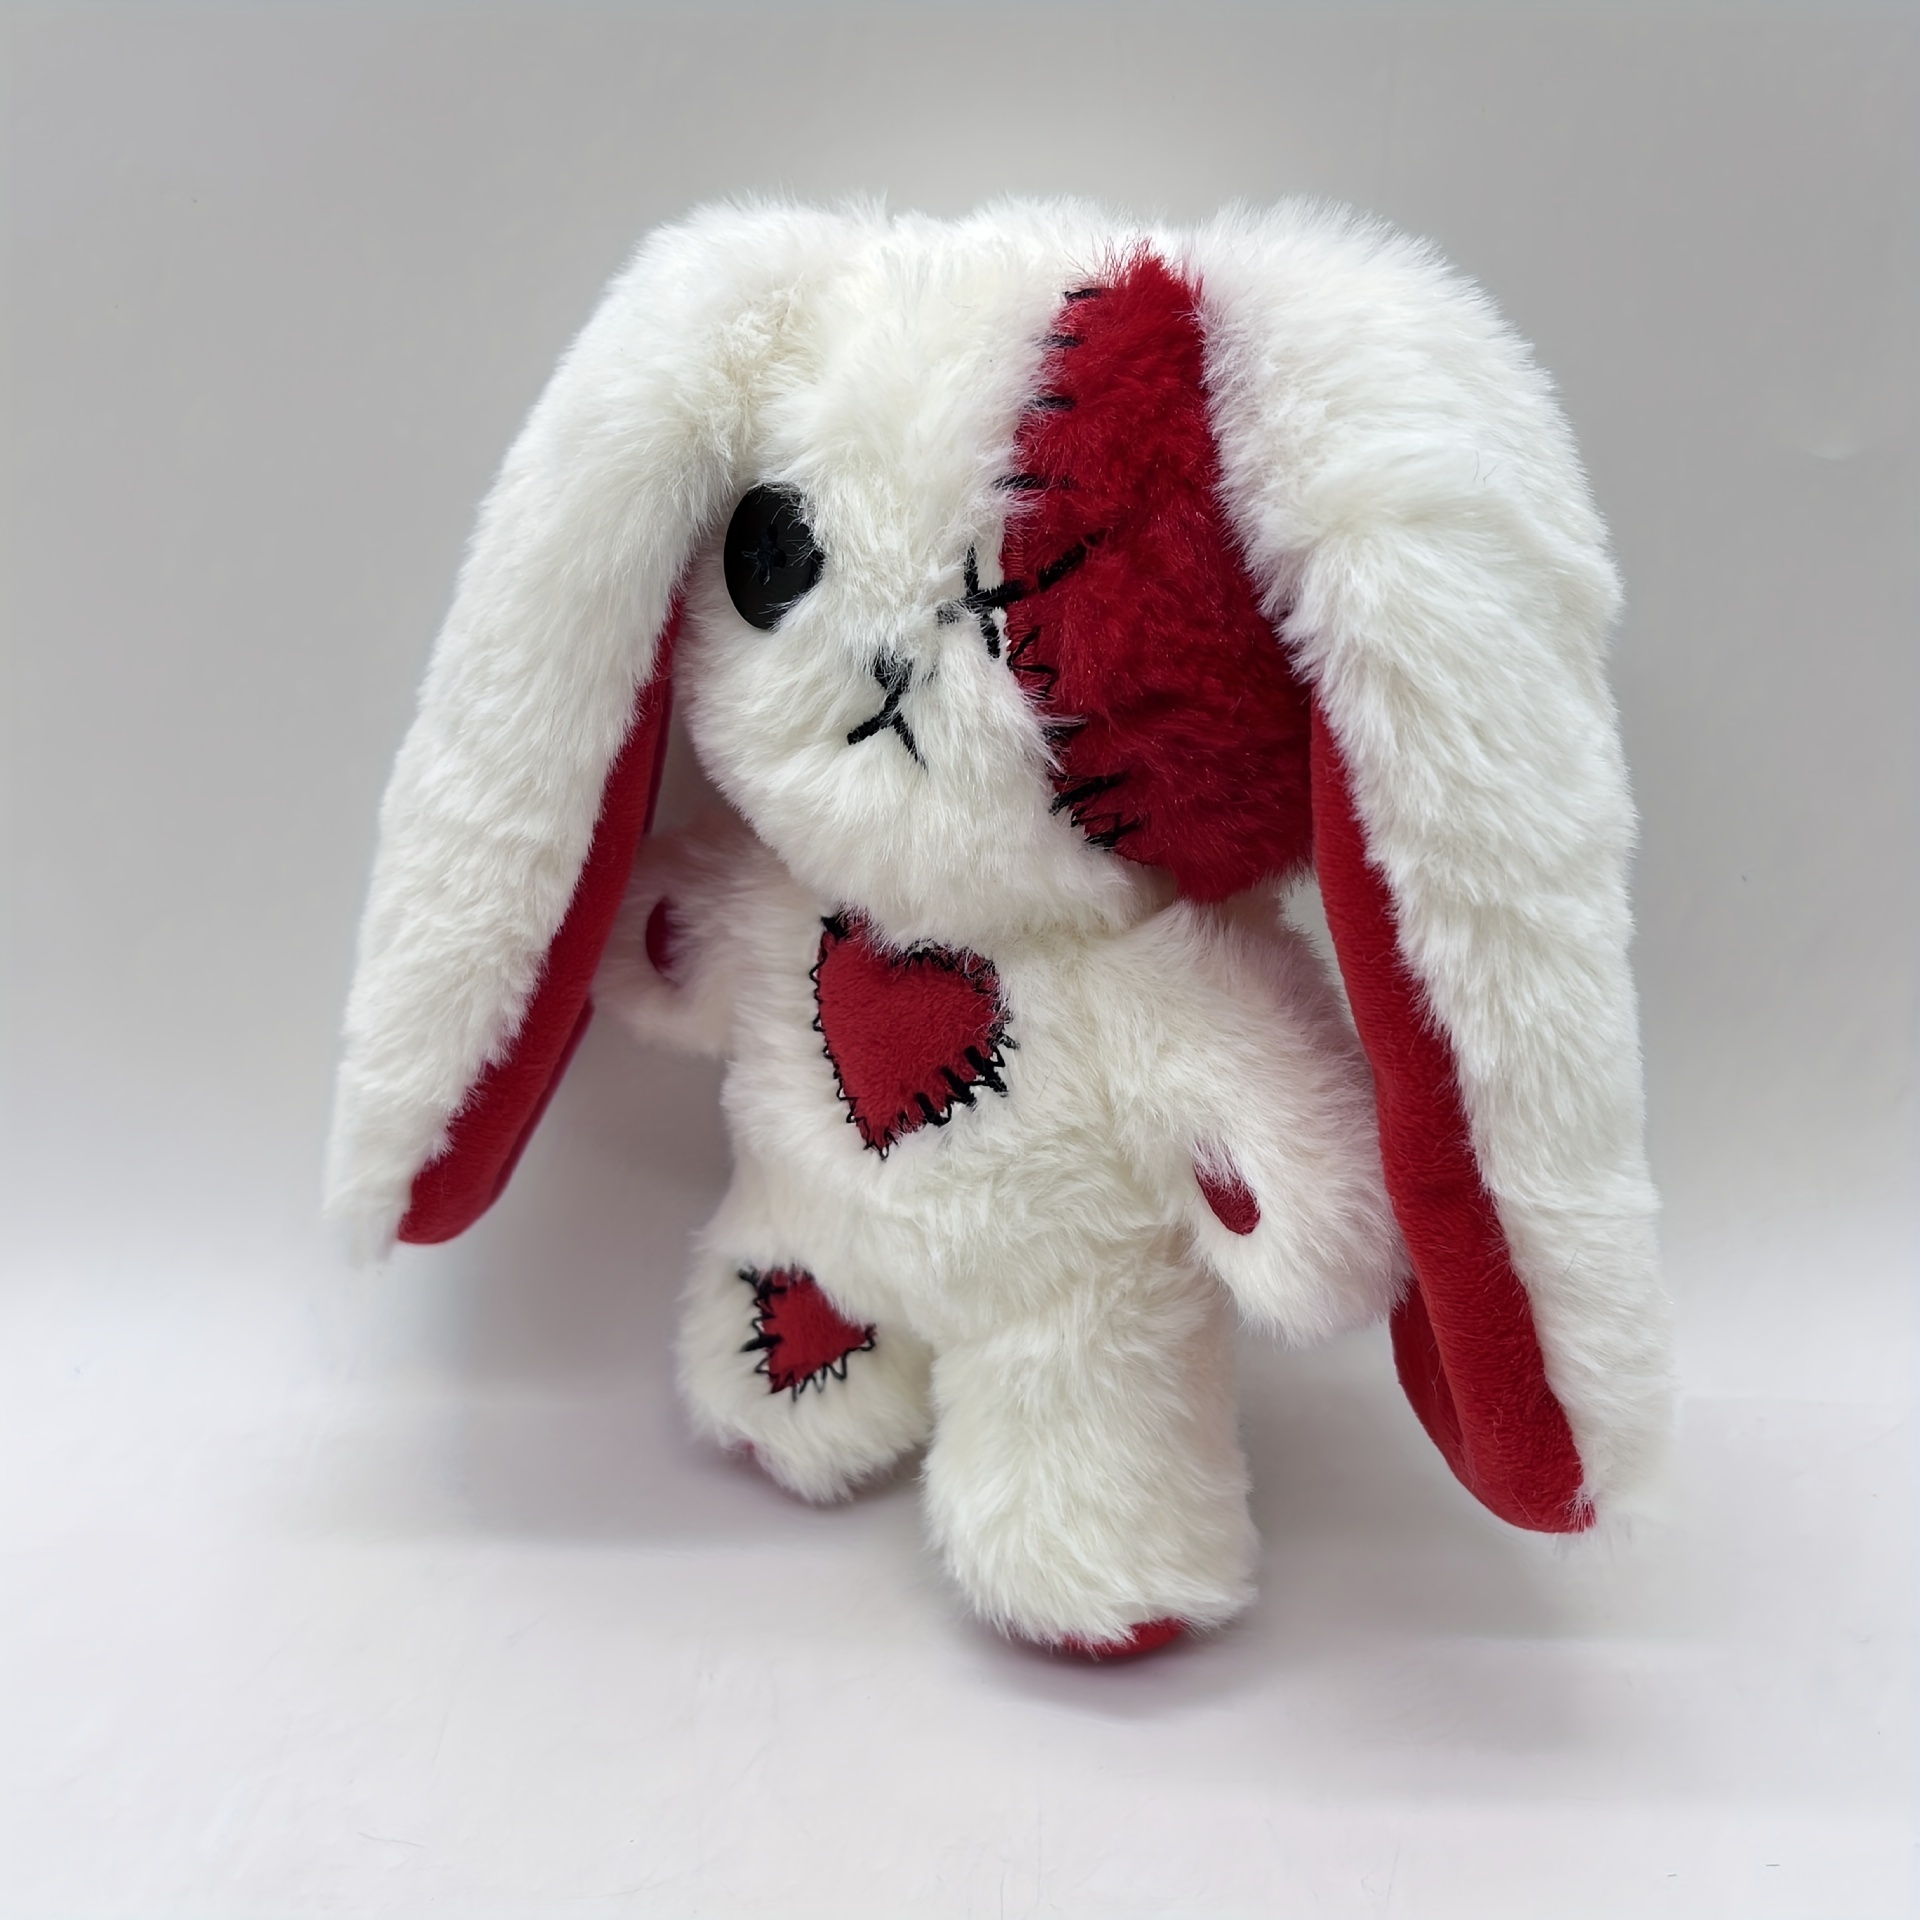  LKMYHY 12in Creepy Goth Bunny Plush Crazy Rabbit Plushie Toys,  Spooky Bunny Stuffed Animal Doll for Halloween Easter Christmas Birthday  Gift (White) : Toys & Games